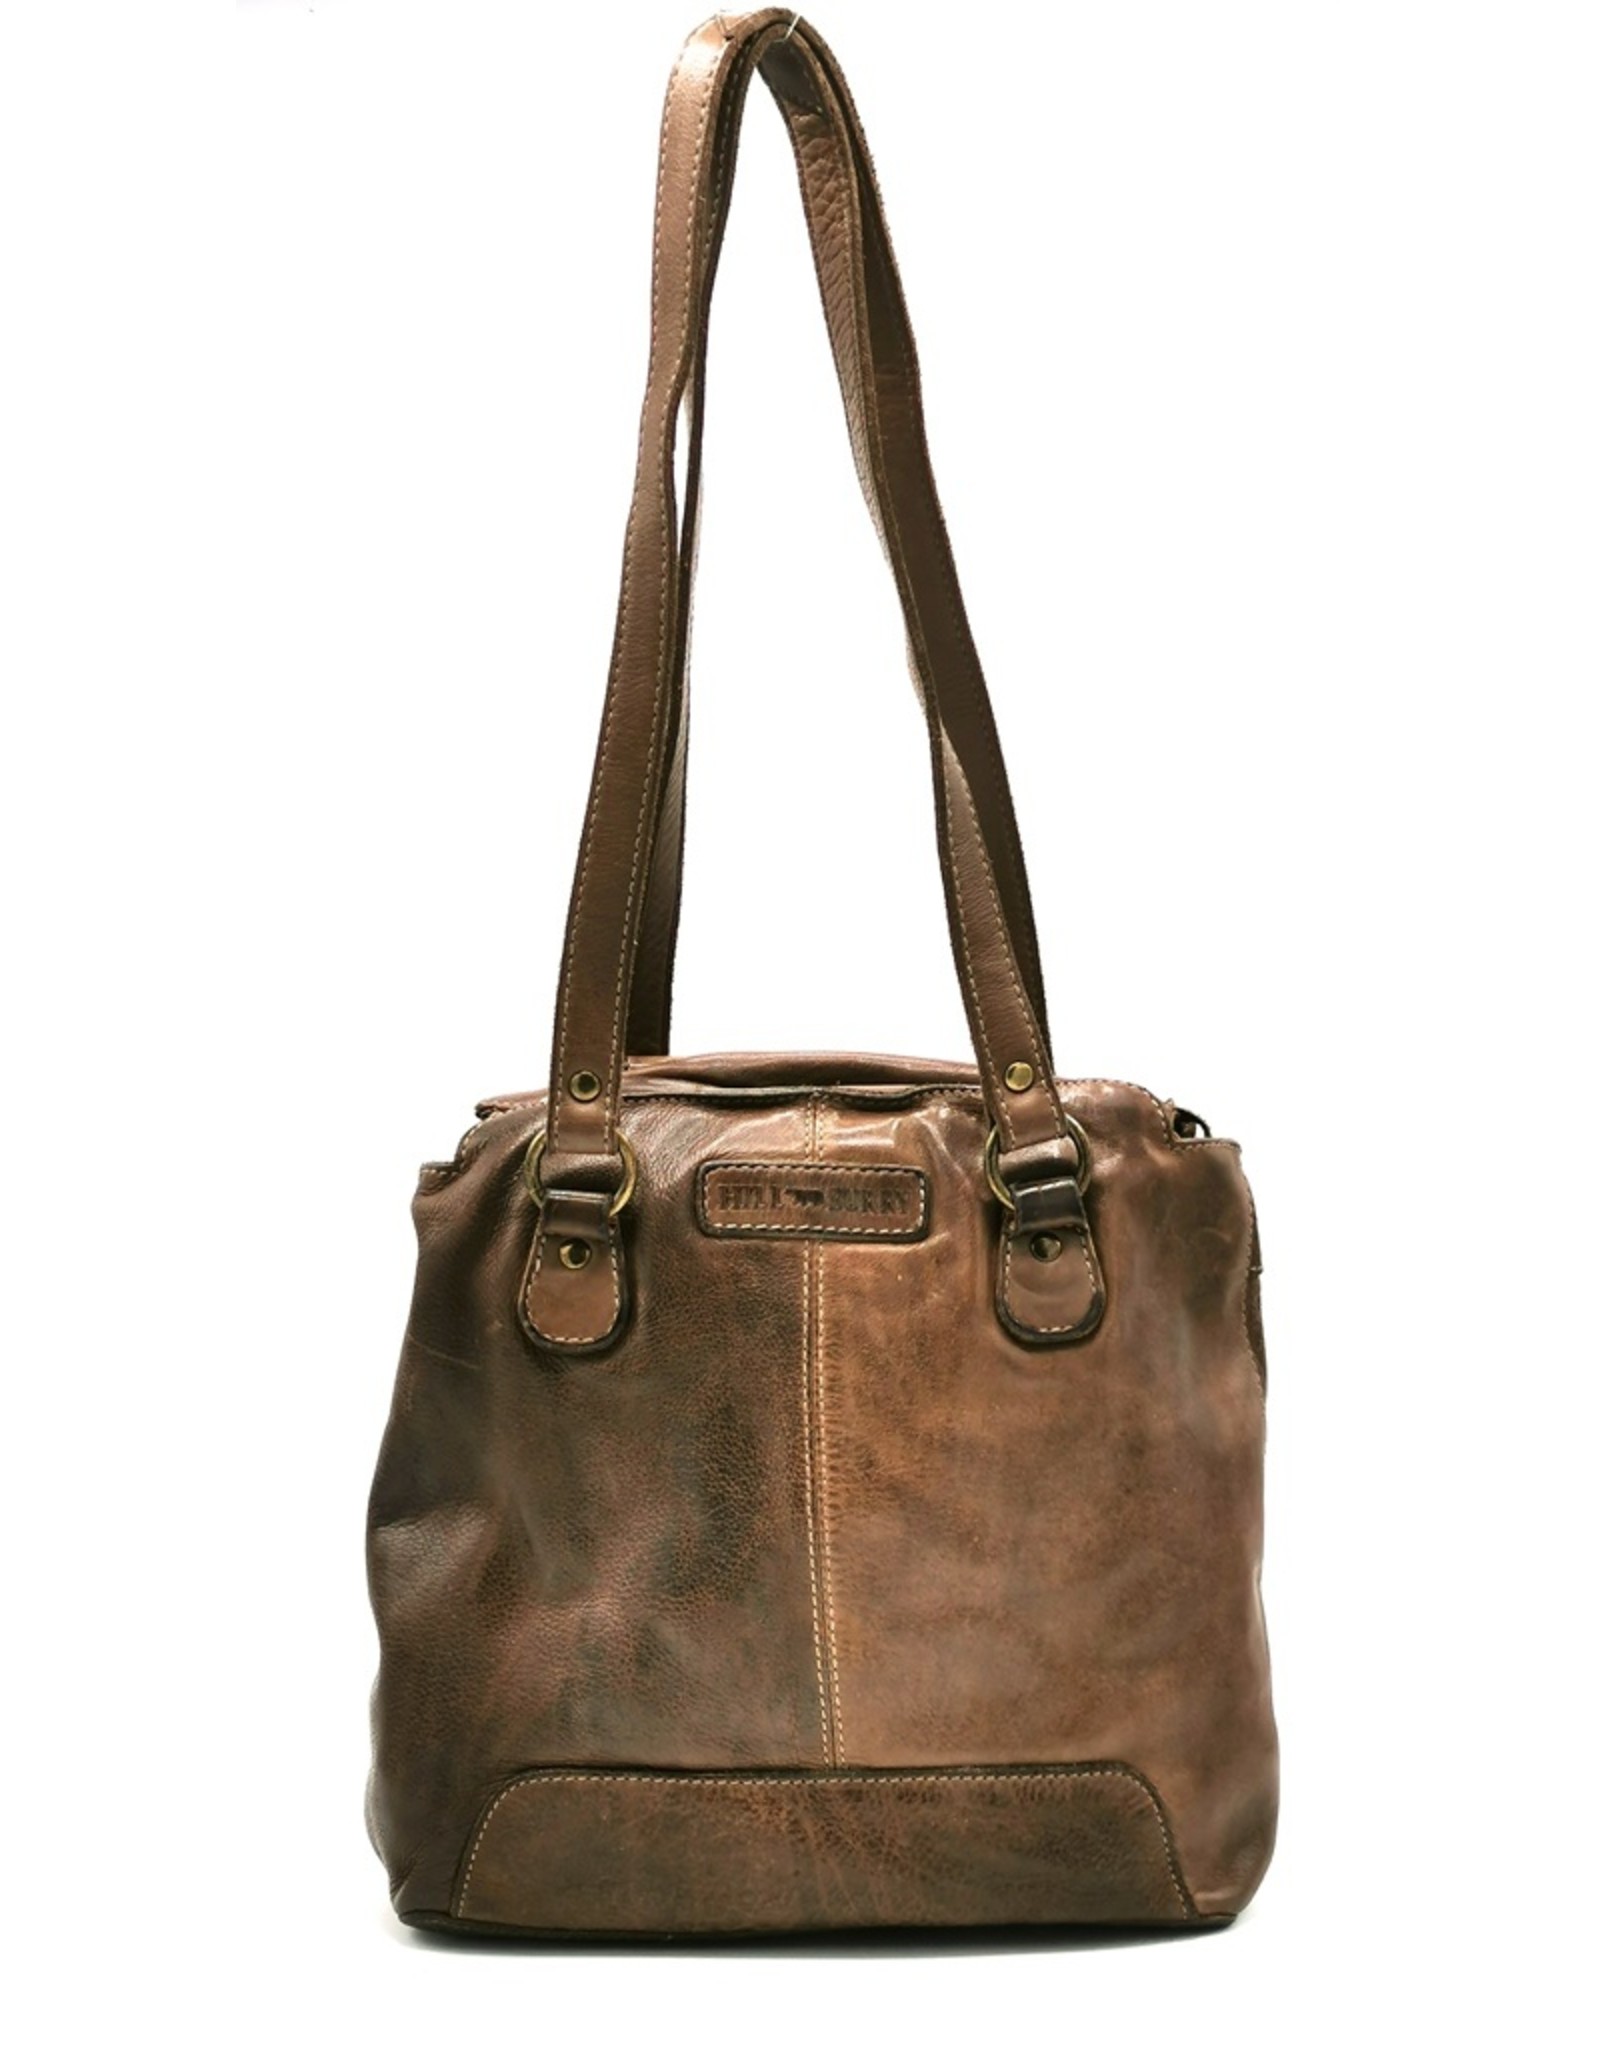 HillBurry Leather backpacks Leather shoppers - HillBurry backpack-shoulder bag washed leather (Taupe)